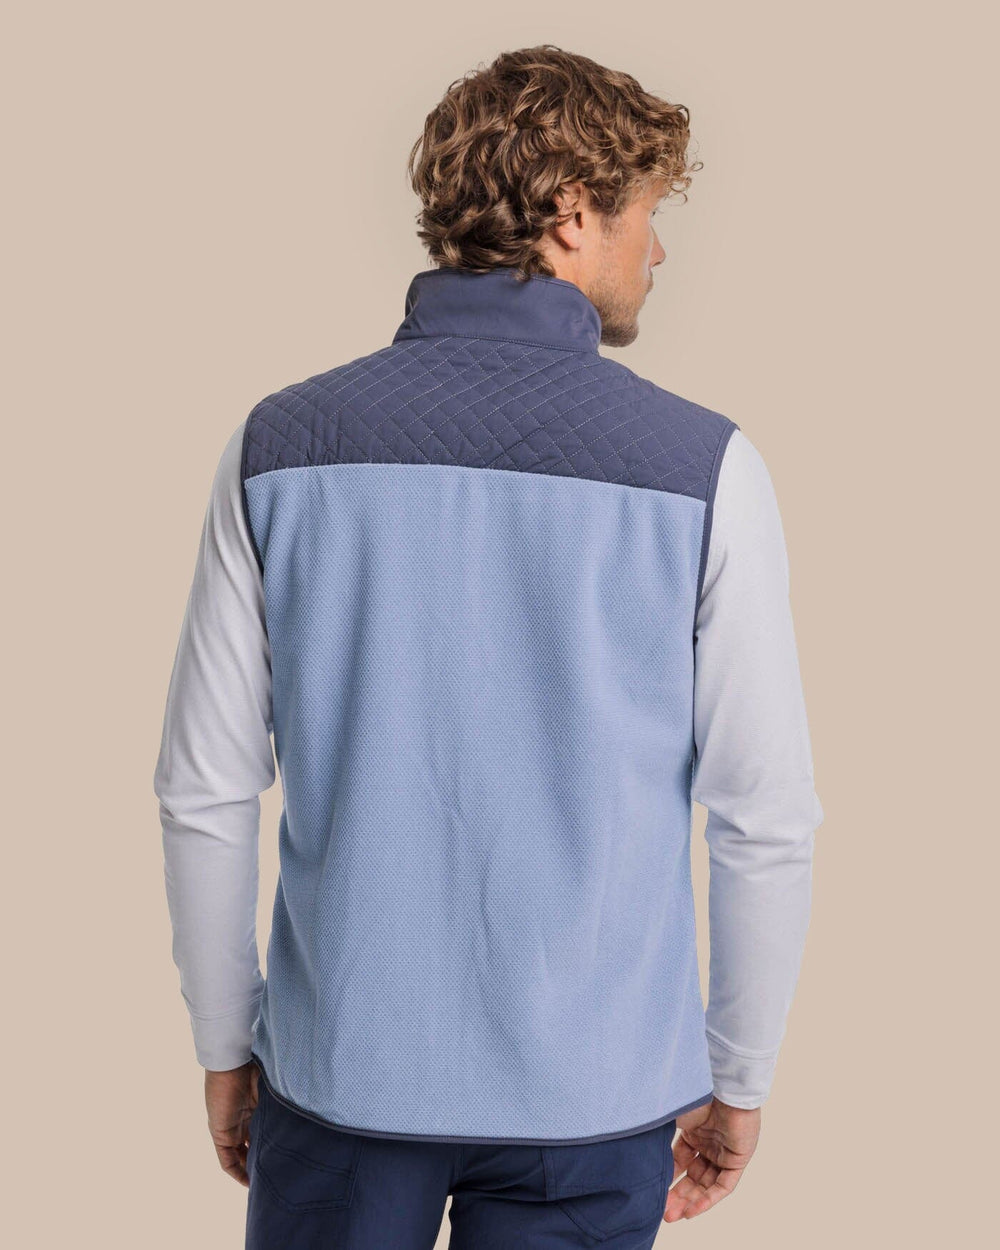 The back view of the Southern Tide Hucksley Vest by Southern Tide - Mountain Spring Blue